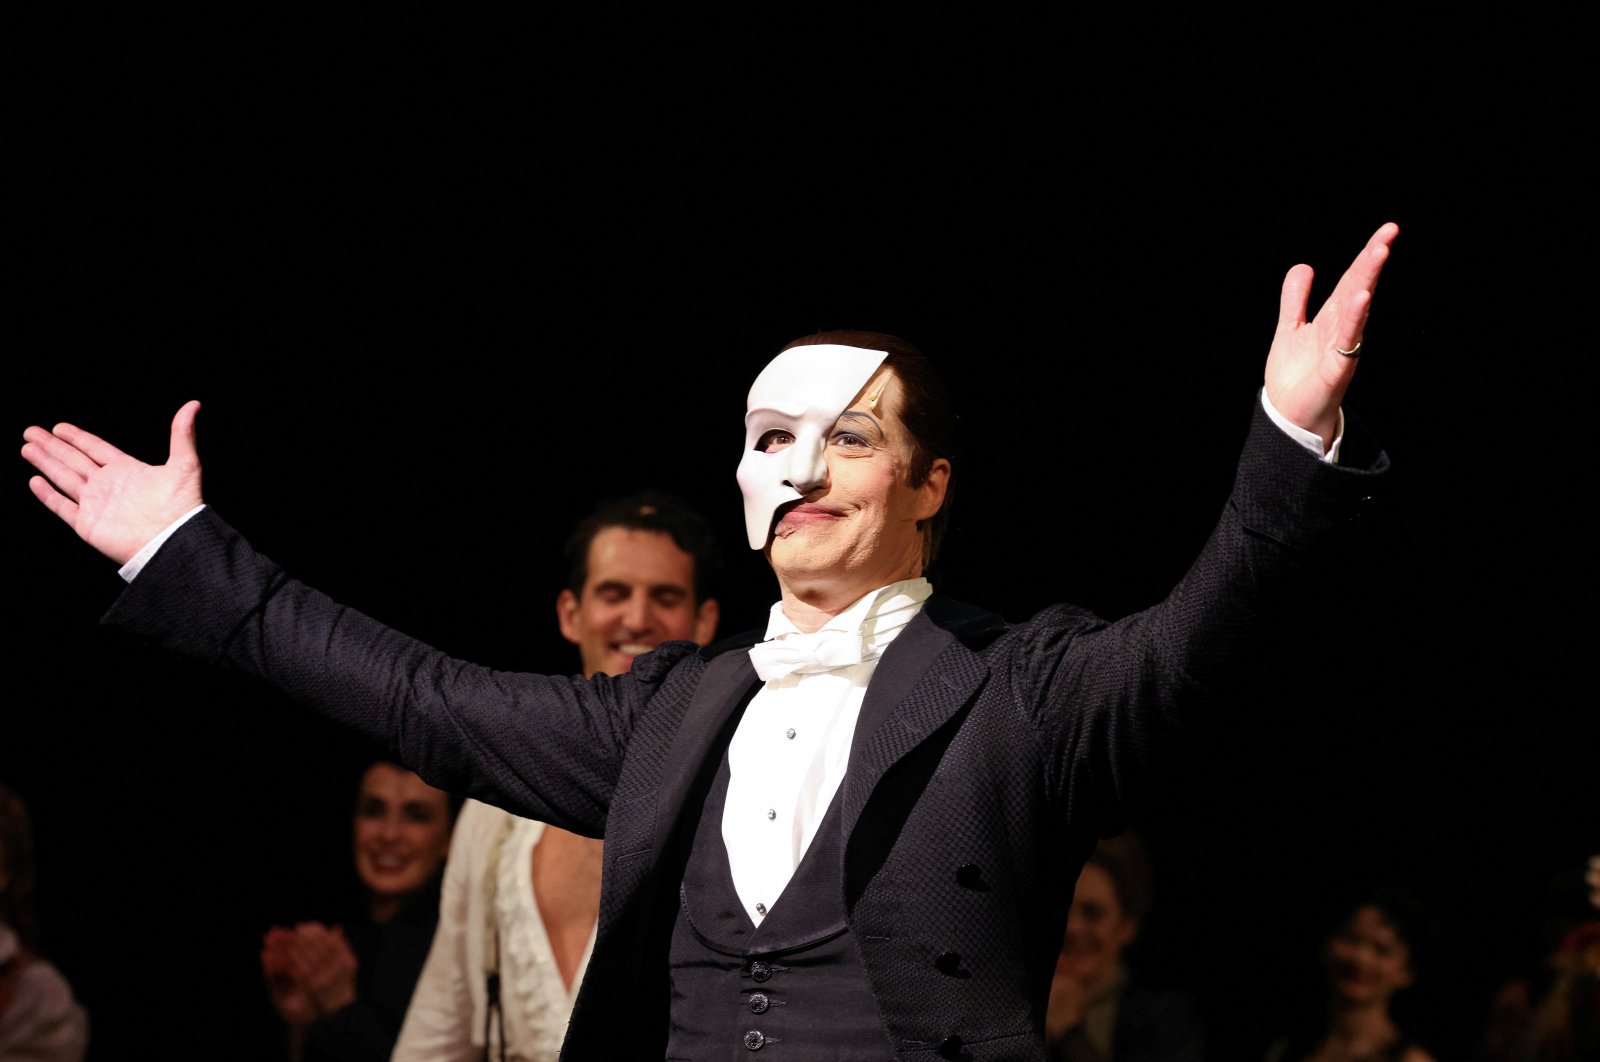 Laid Mackintosh, who substituted for Ben Crawford as the Phantom, takes a bow after his final performance of &quot;Phantom of the Opera, which closes after 35 years on Broadway, in New York City, U.S., April 16, 2023. (Reuters Photo)